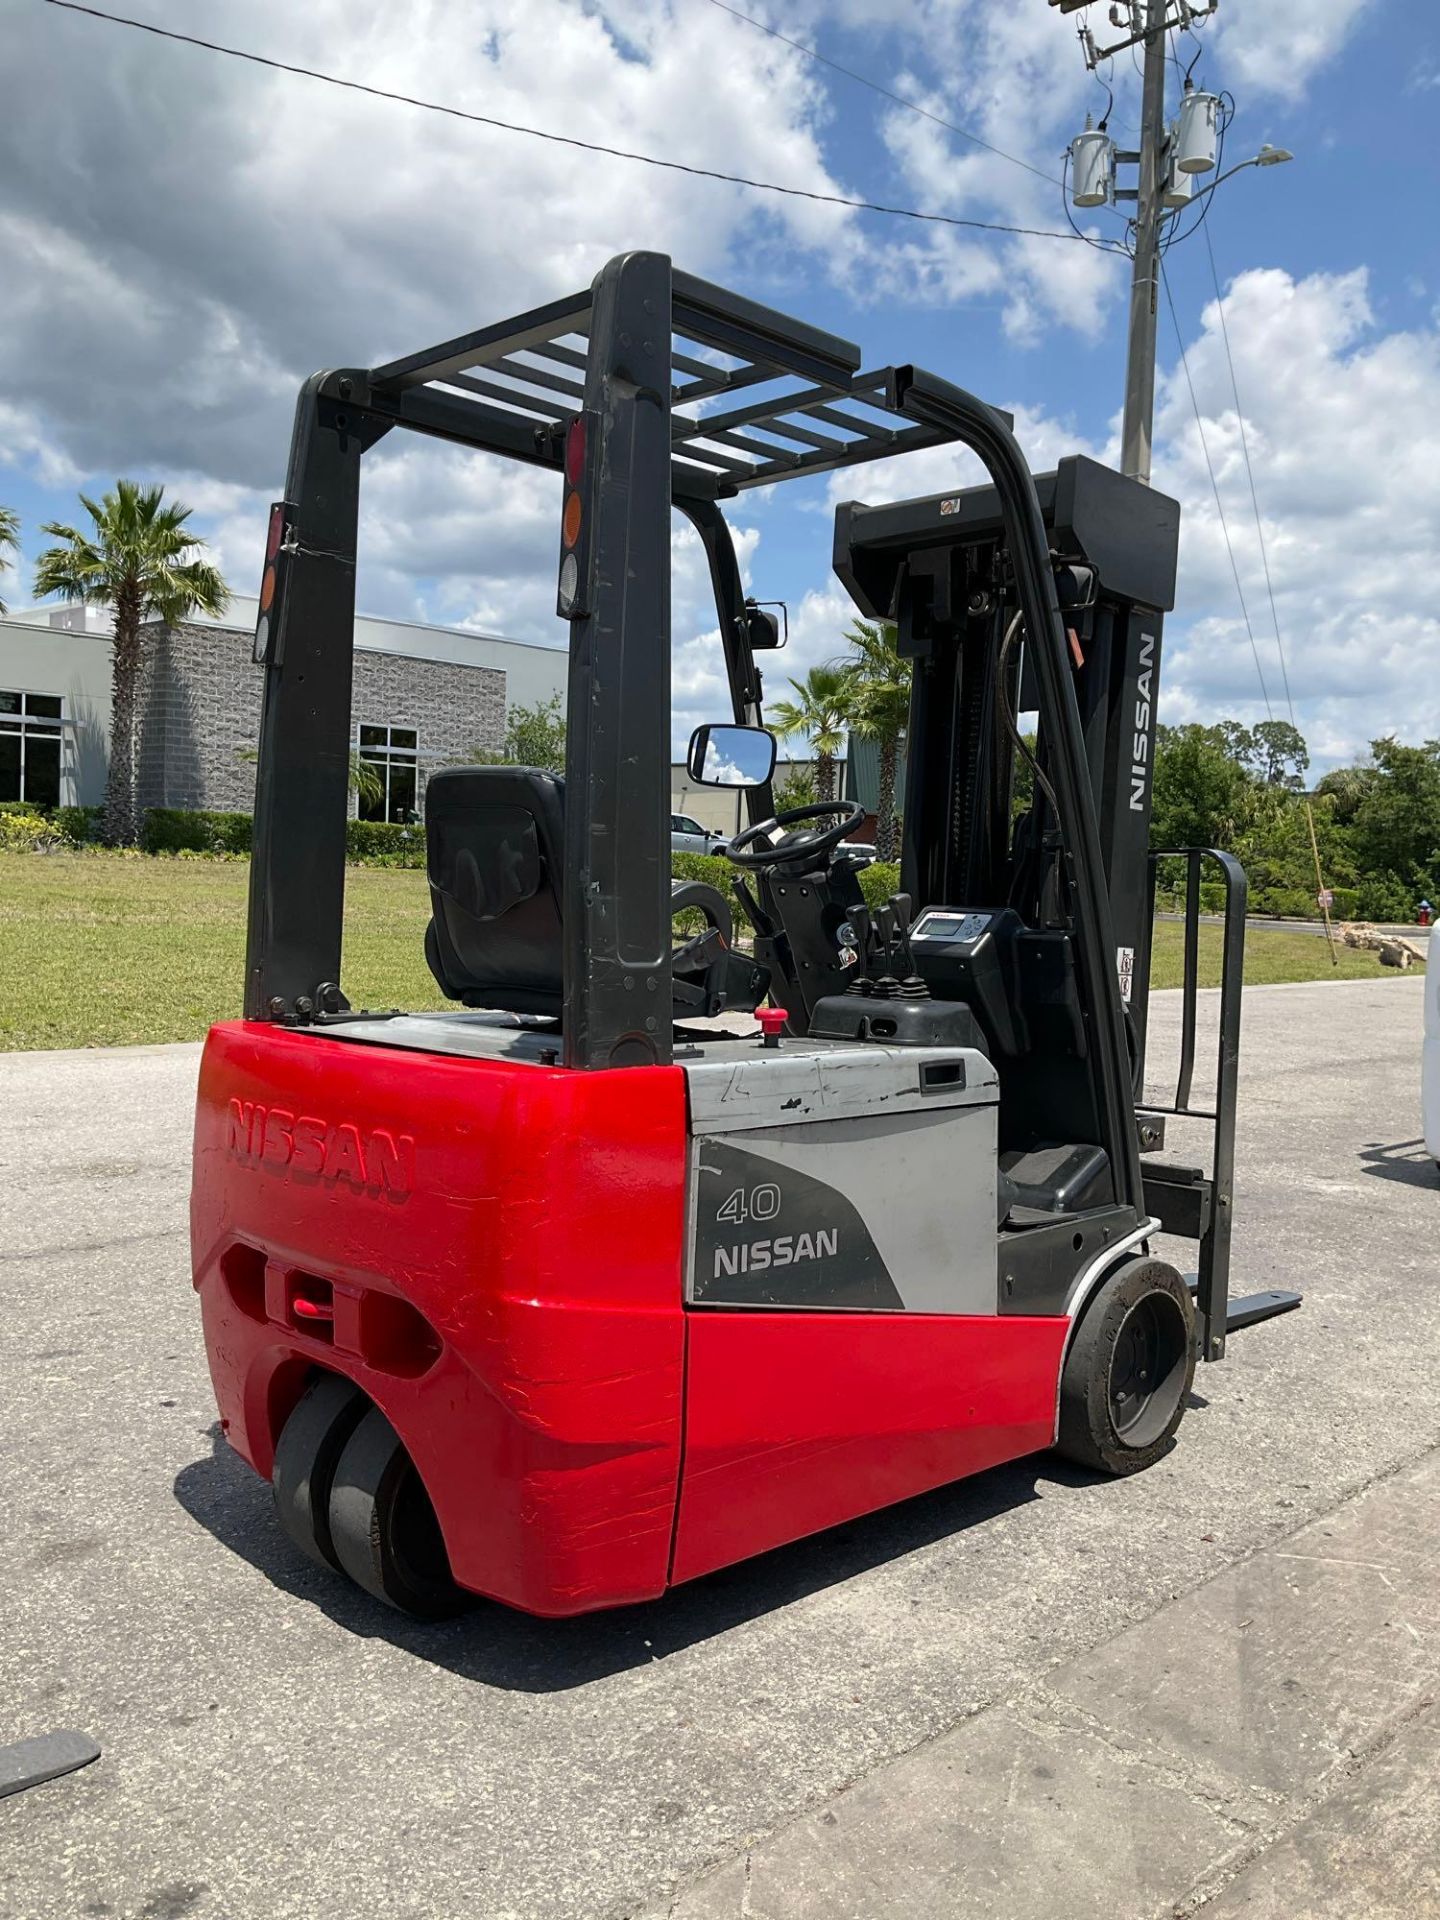 NISSAN 40 FORKLIFT MODEL G1N1L20V, ELECTRIC, APPROX MAX CAPACITY 4,000 LBS, MAX HEIGHT 240in, TILT, - Image 5 of 24